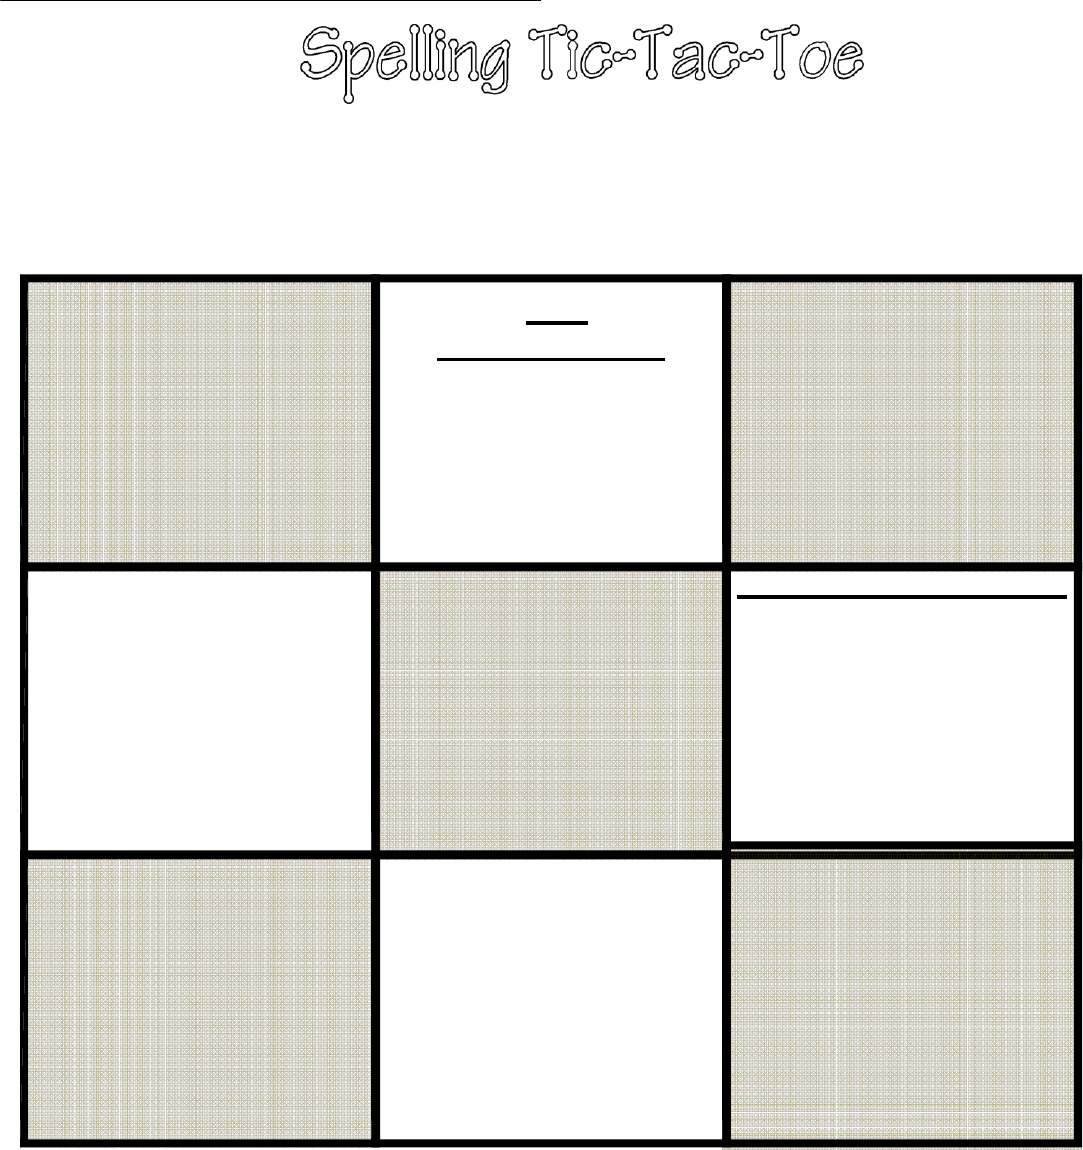 Tic Tac Toe Template In Word And Pdf Formats Intended For Tic Tac Toe Template Word